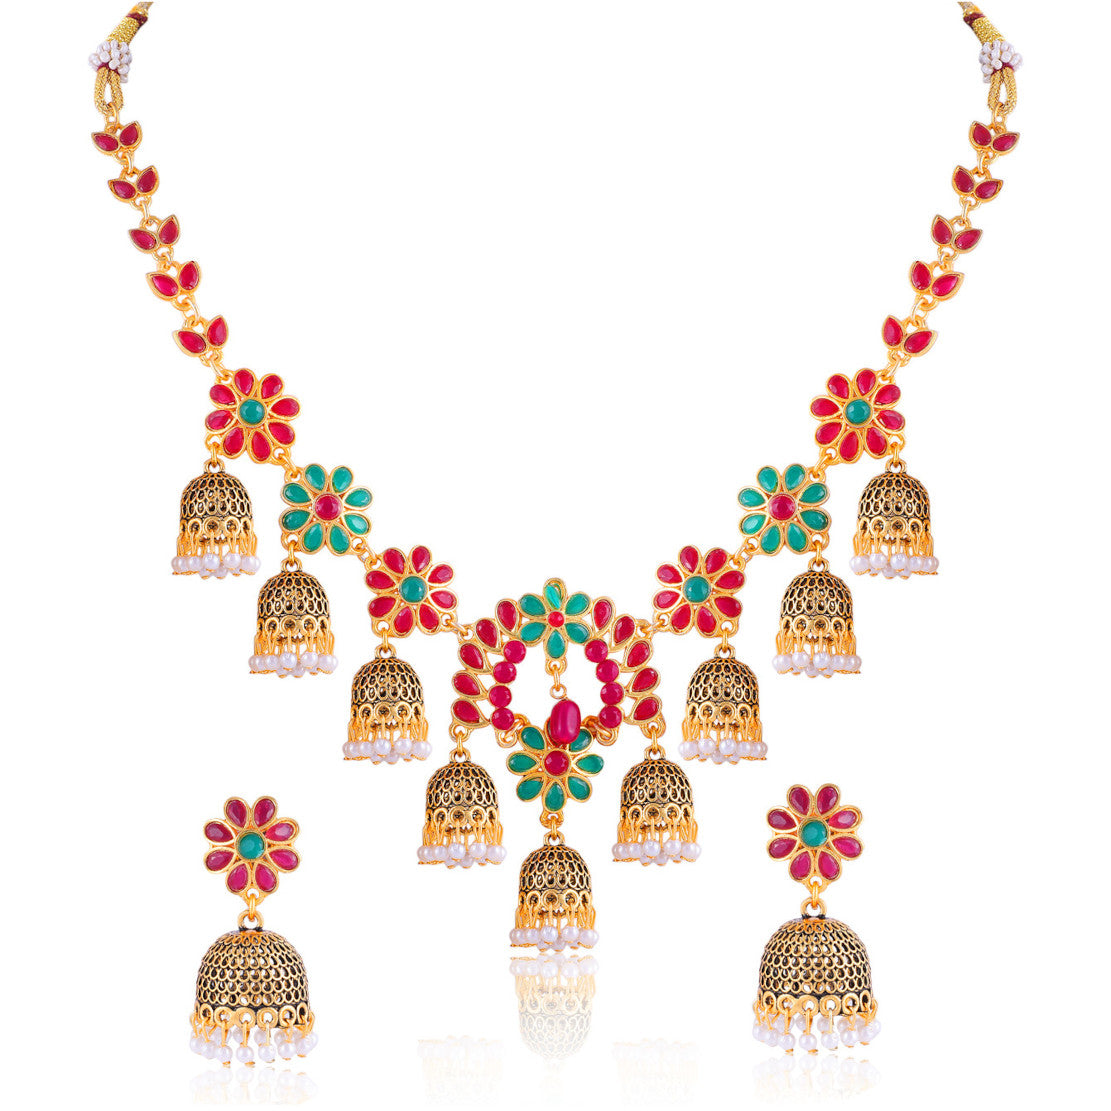 Traditional Designed by Handcrafted Multicolor Necklace with Earrings for Women | Buy This Necklace Online from Mekkna